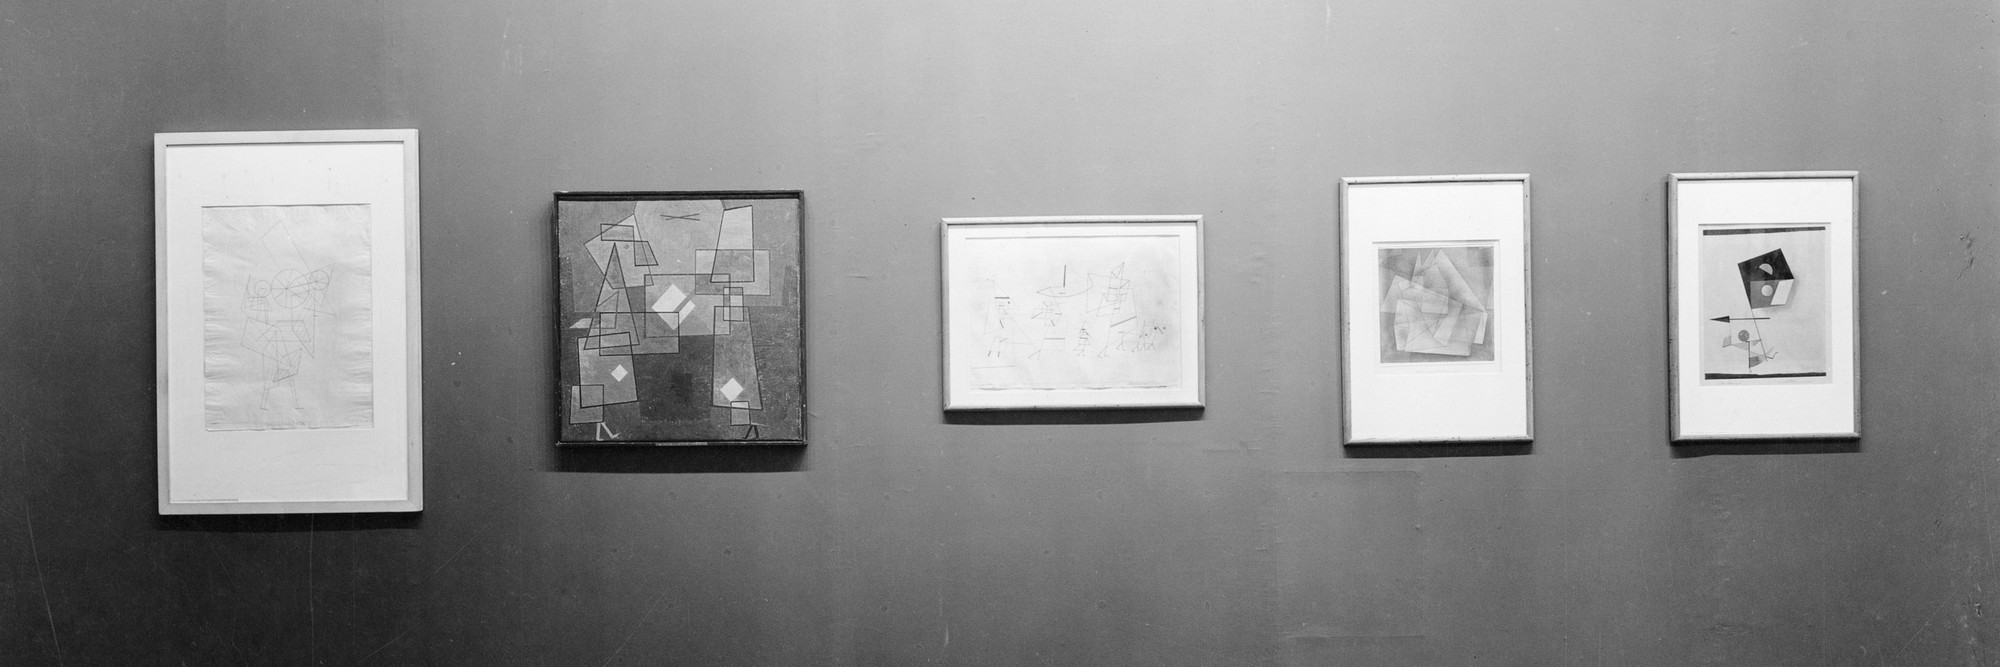 Installation view of Paul Klee at The Museum of Modern Art, New York. Photo: Soichi Sunami